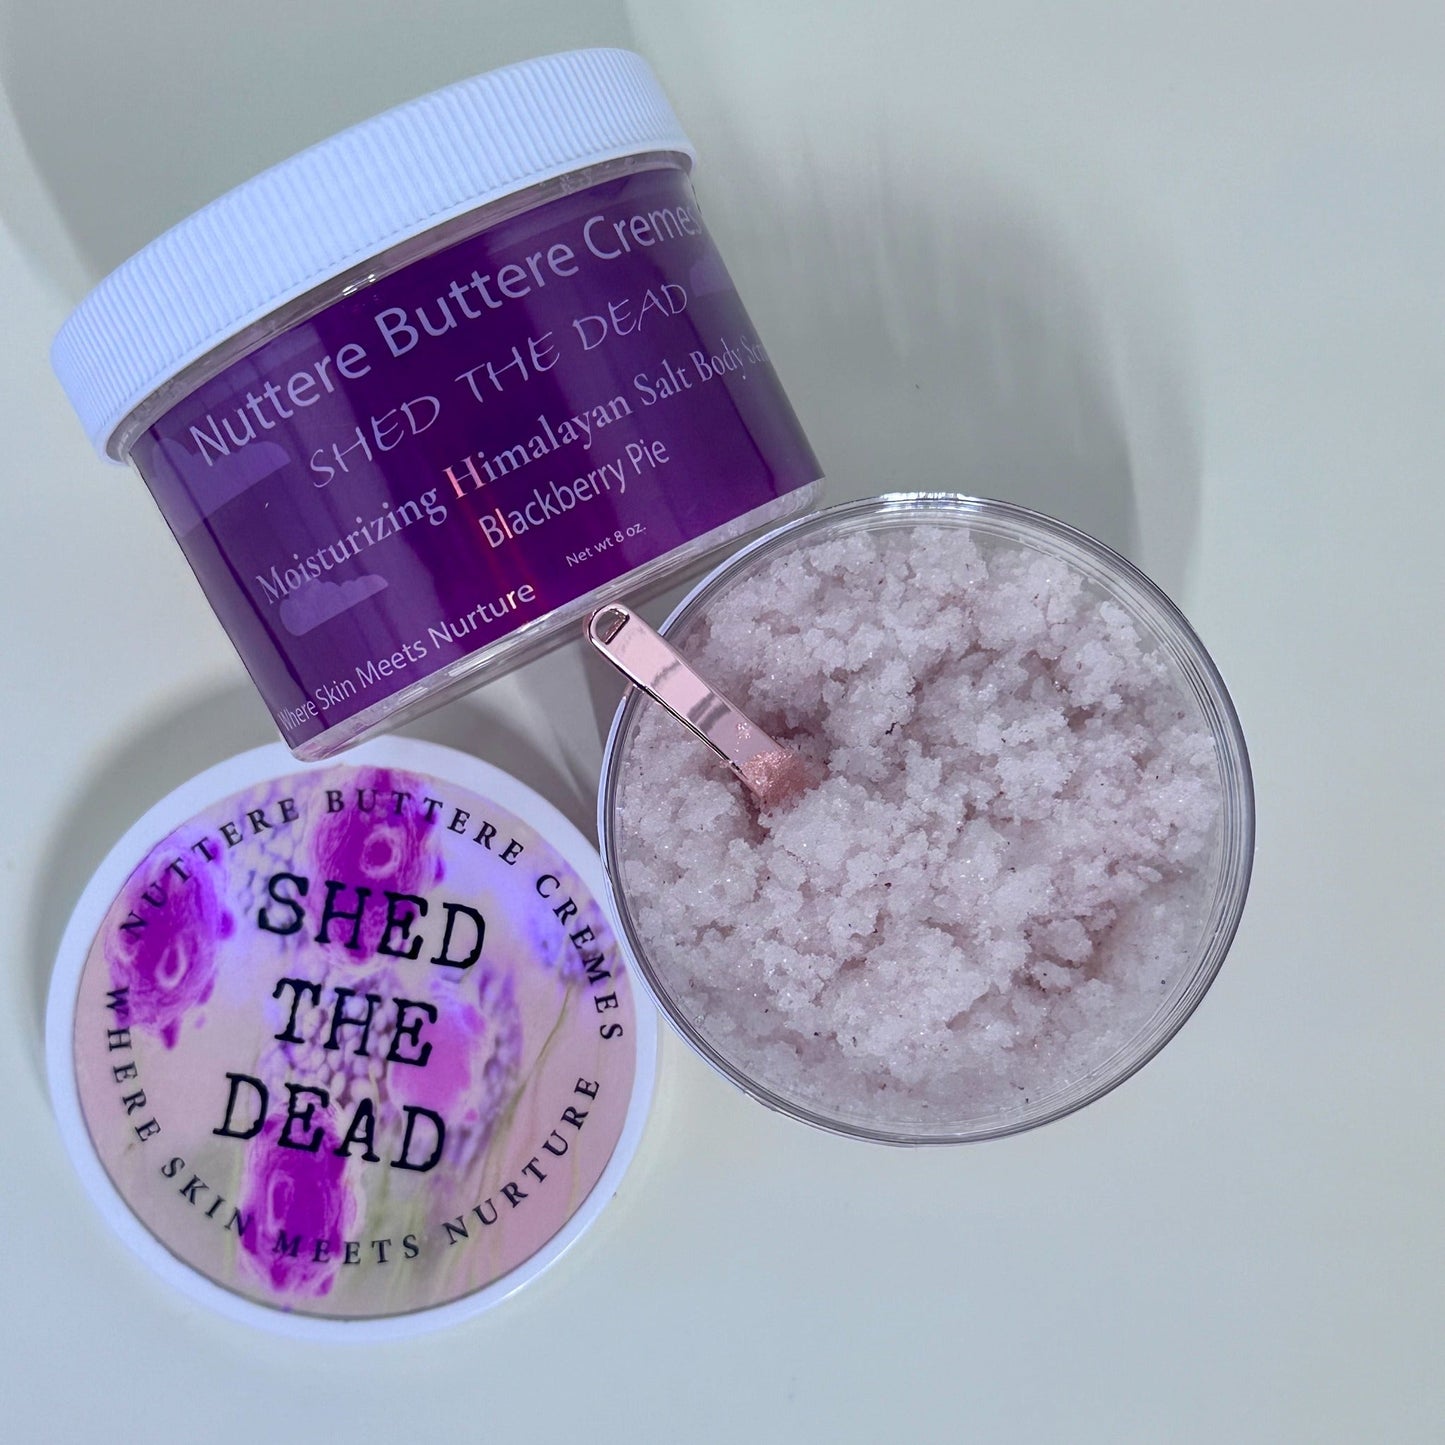 Image of Shed the Dead Body Scrub in Himalayan Salt - Natural Exfoliating Scrub for Smooth & Radiant Skin.